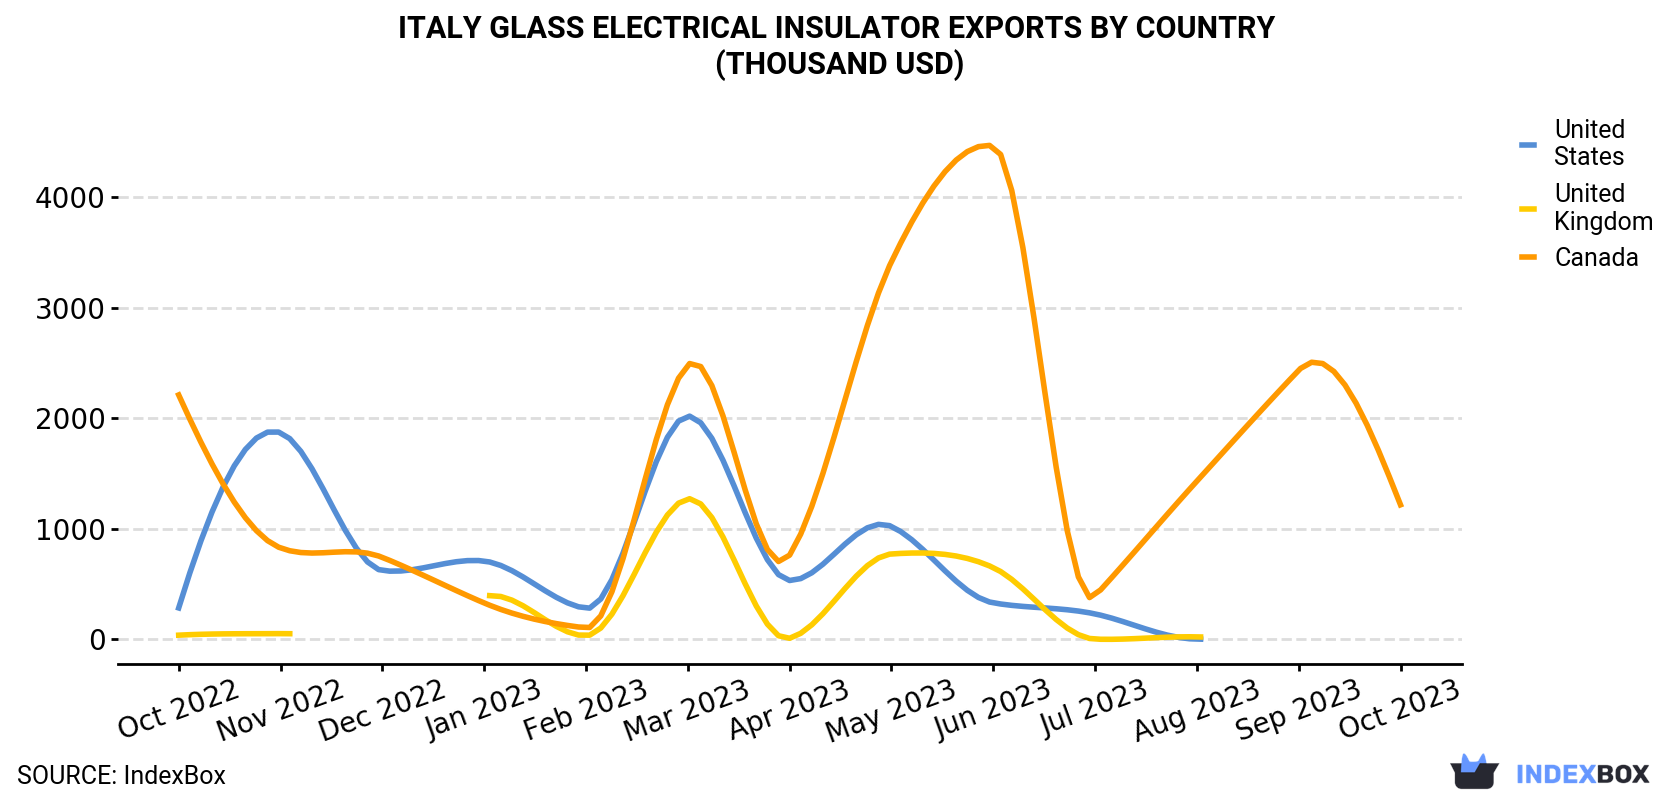 Italy Glass Electrical Insulator Exports By Country (Thousand USD)